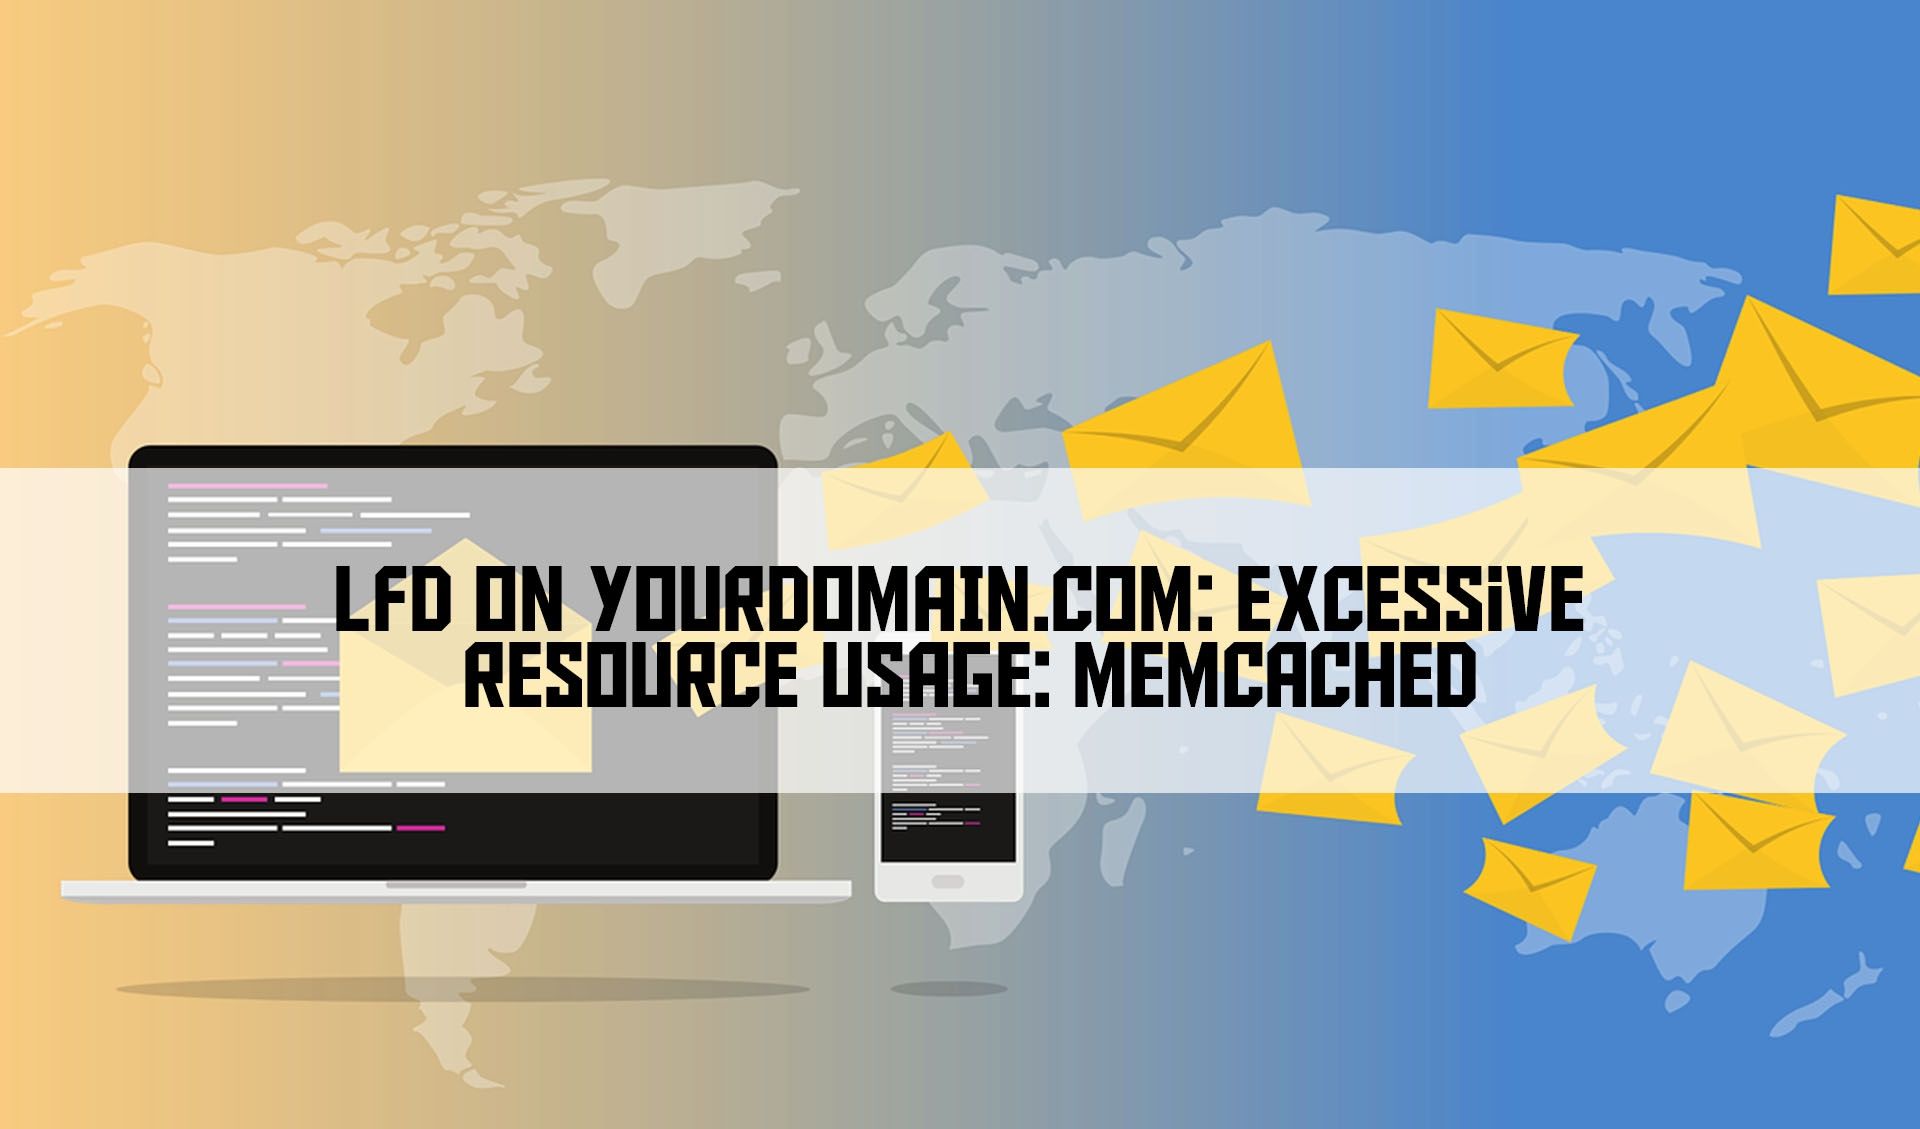 Disabled lfd on yourdomain.com: Excessive resource usage: memcached